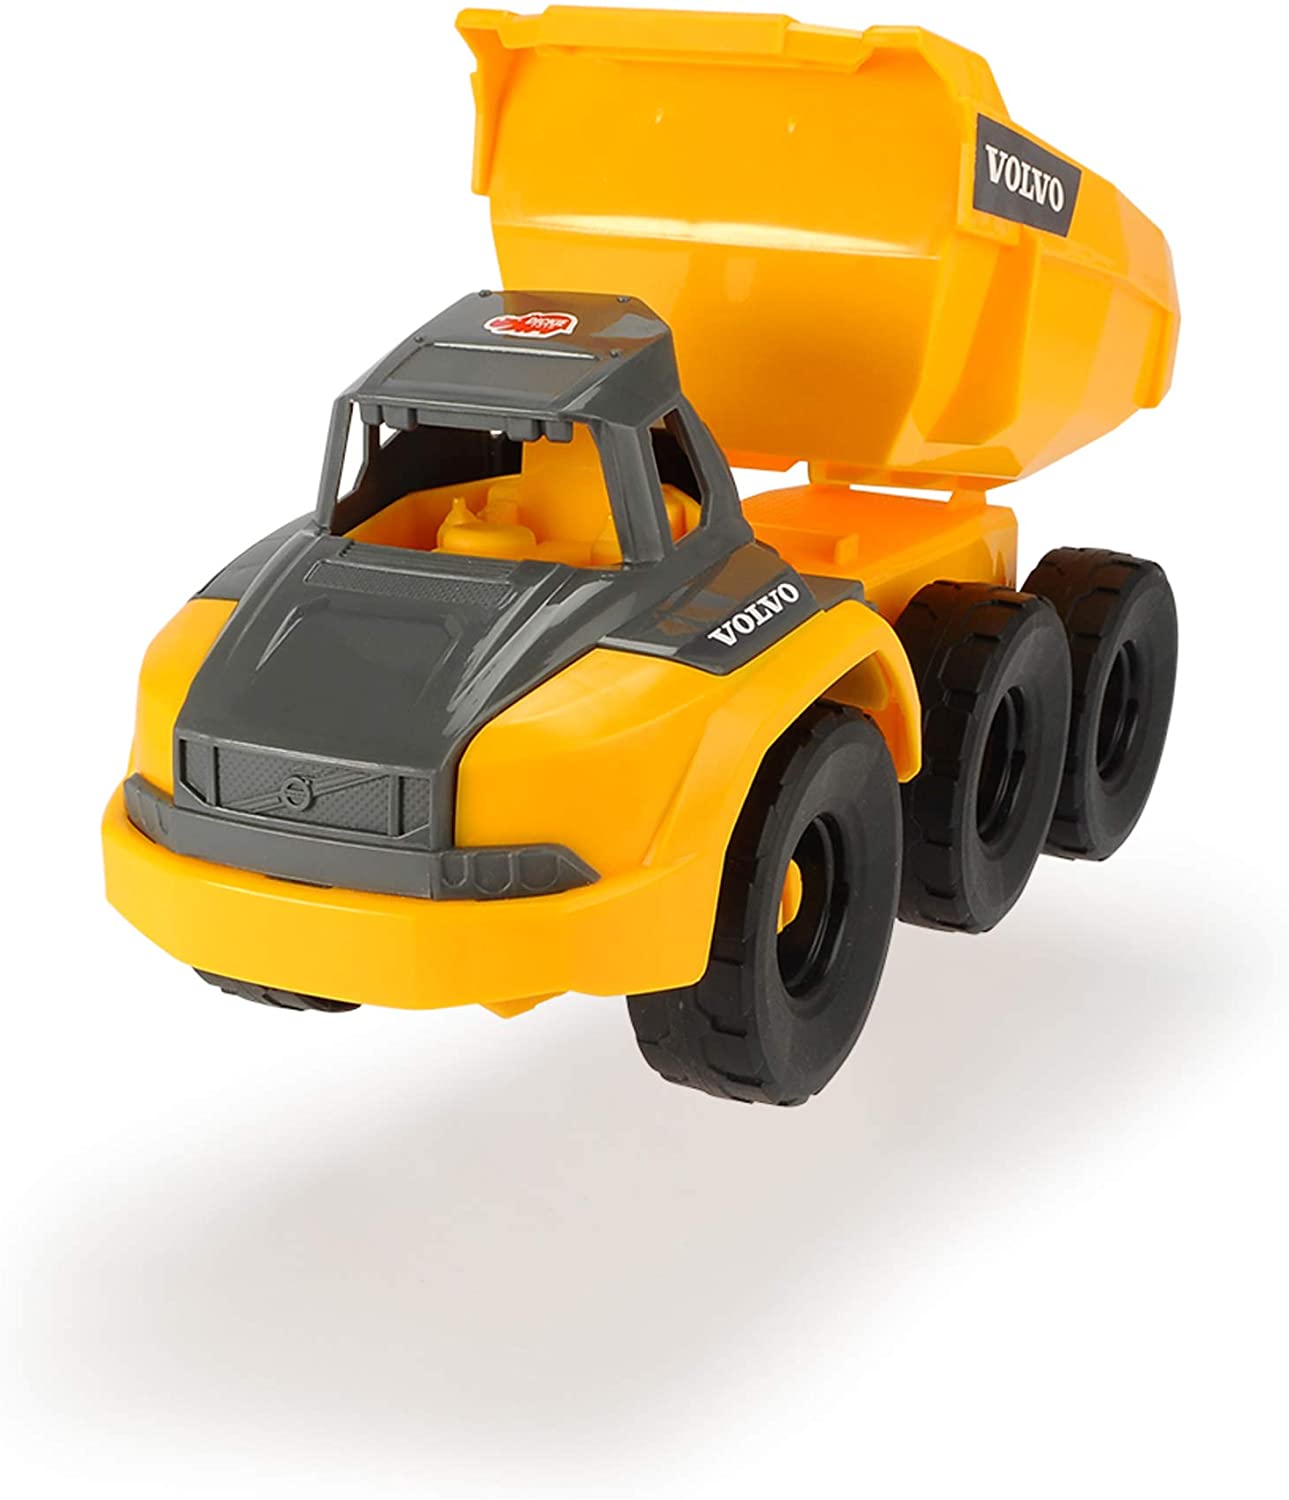 Dickie Toys Volvo Dump Truck Toy With Free Wheel, Movable Axle Behind Cab M